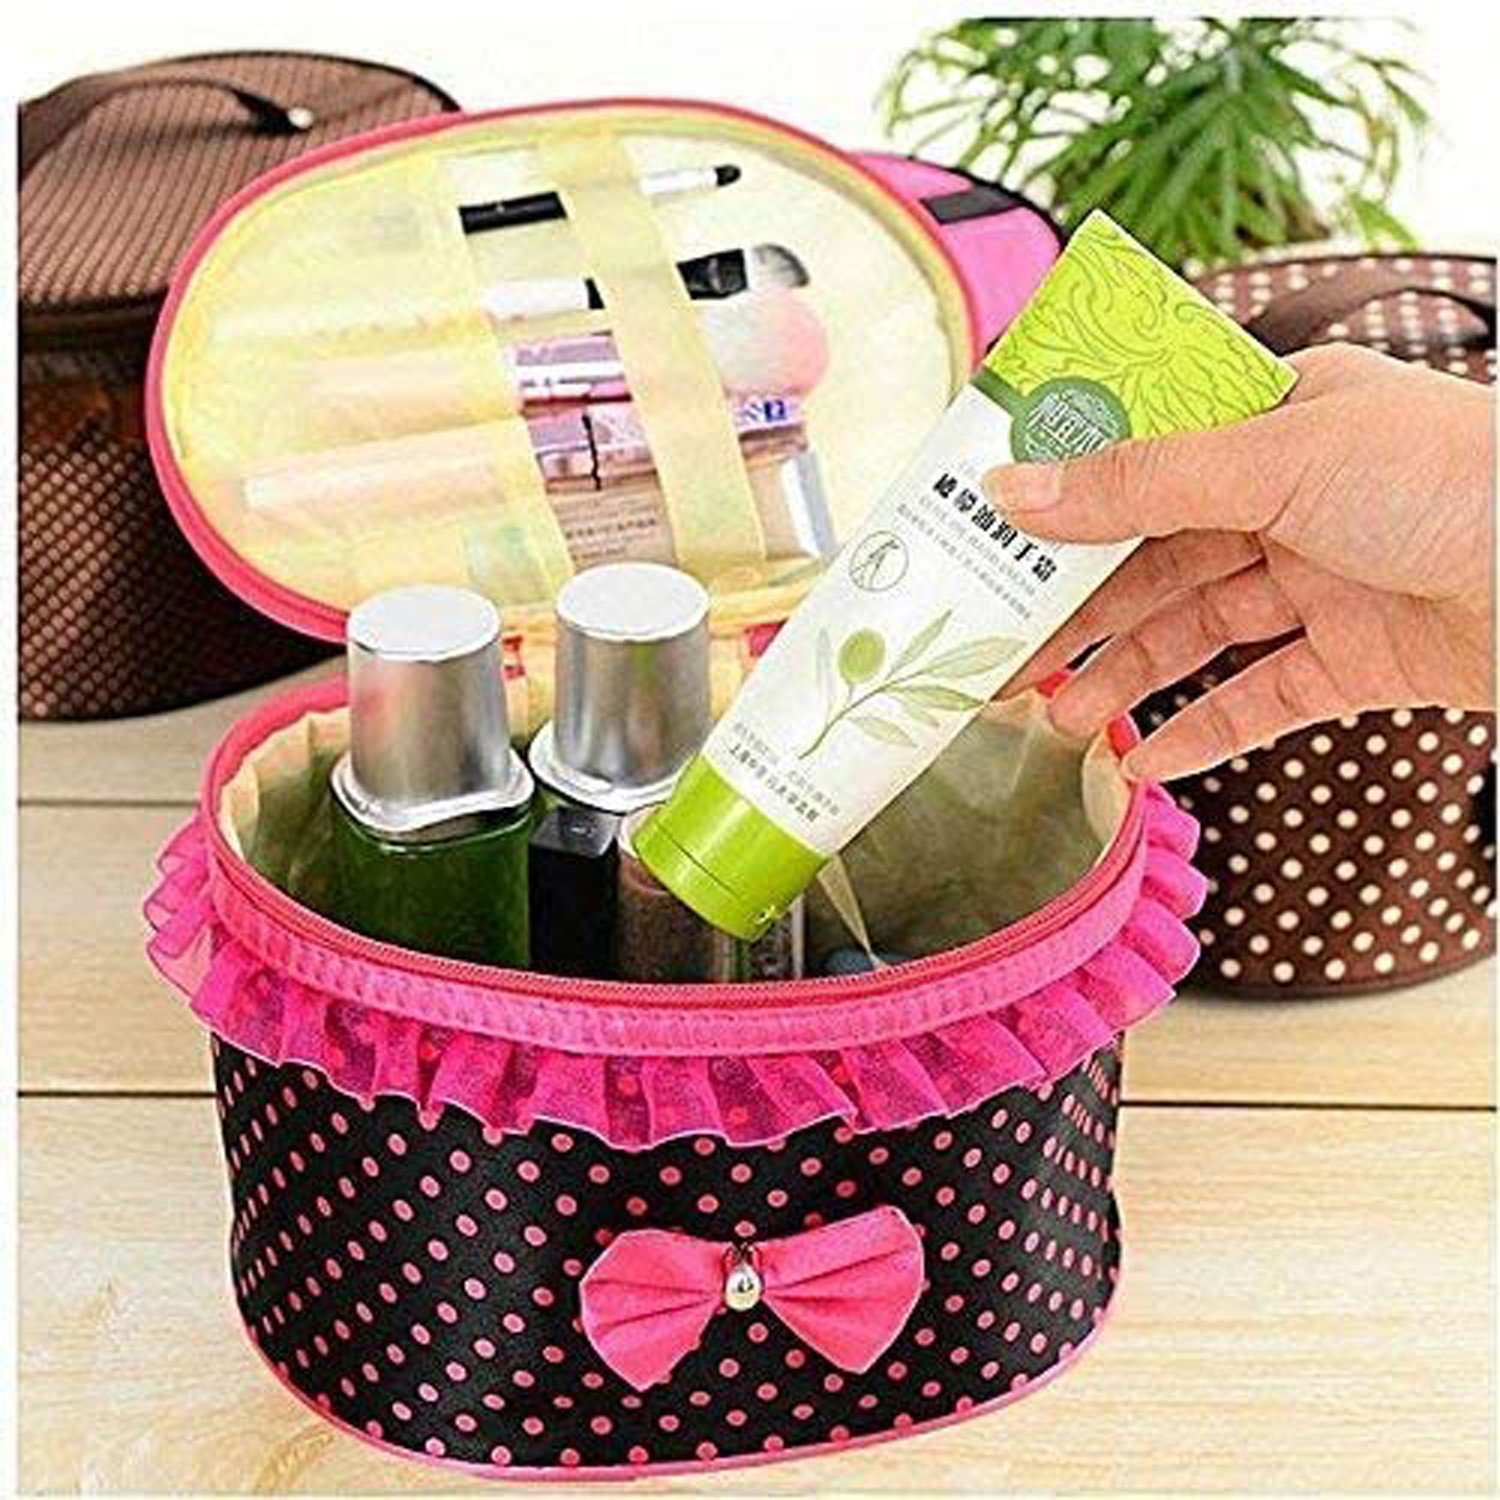 Kuber Industries Dot Printed Multifunction Travel Cosmetic Make-Up Bag with Small Mirror for Cosmetics, Makeup, Brushes (Pink & Red)